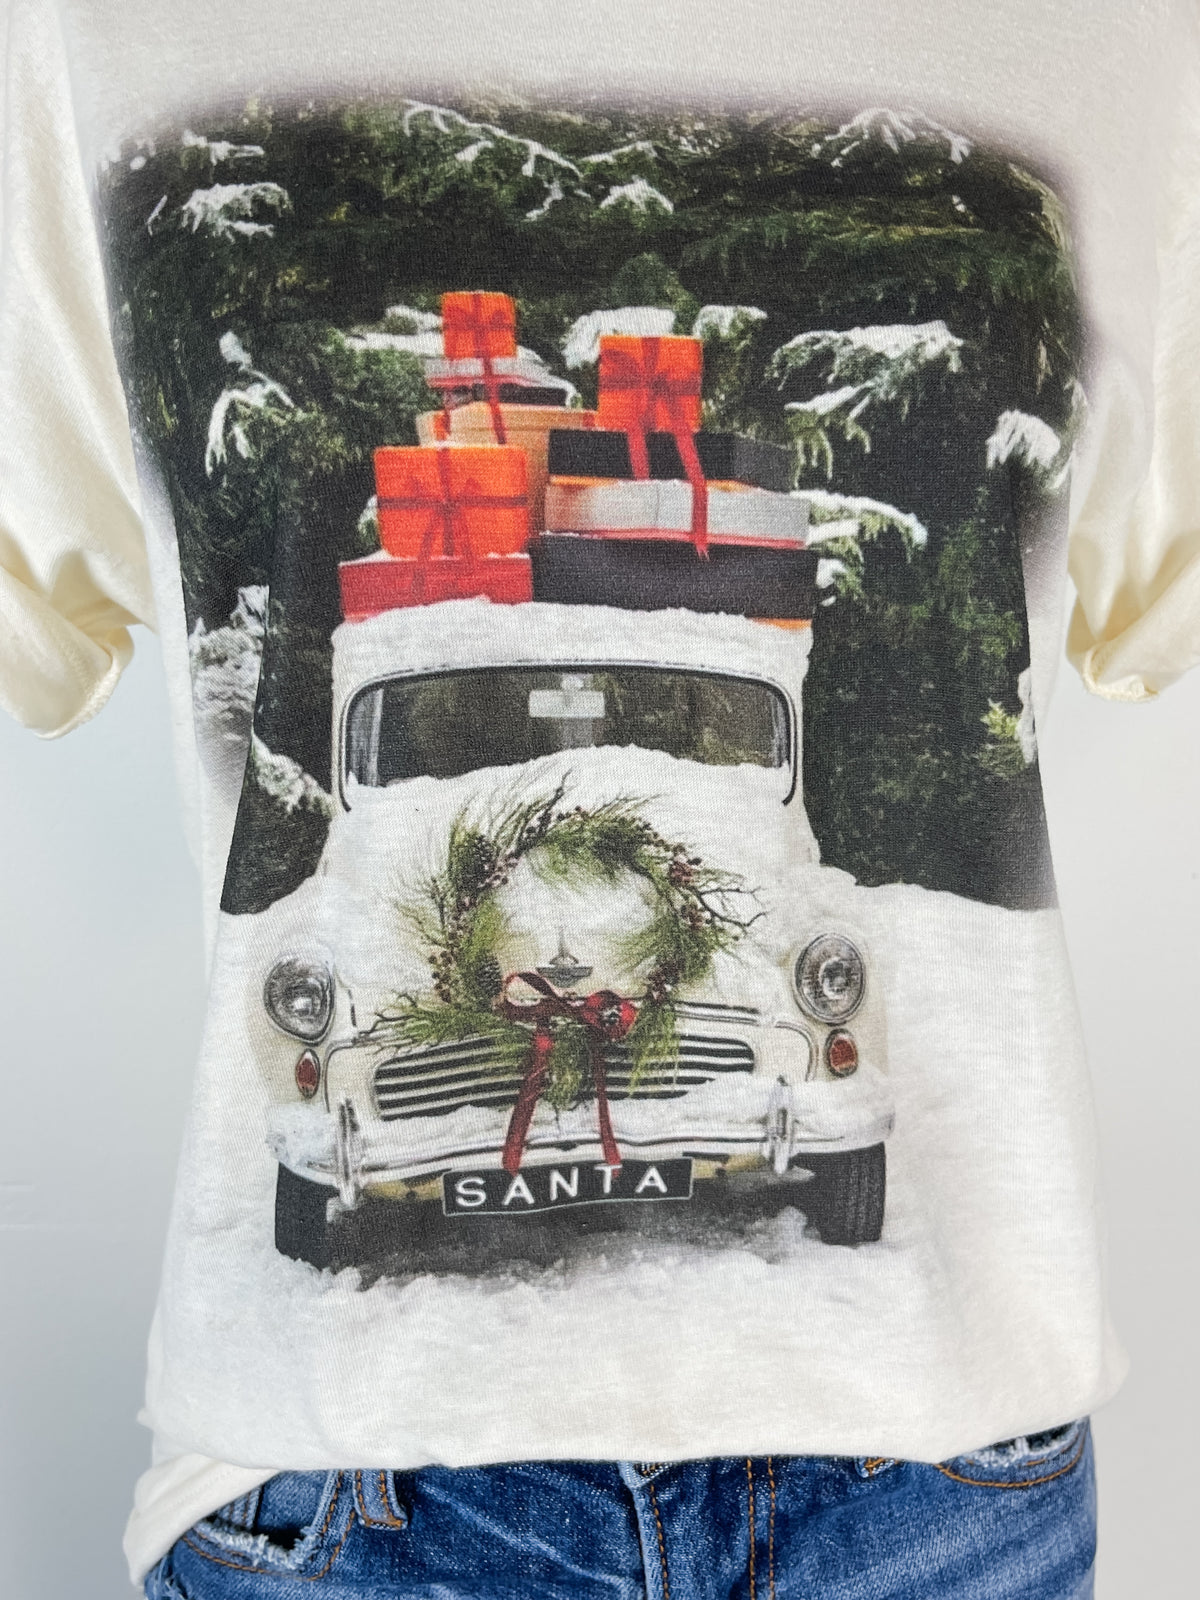 Christmas Truck Tee in Natural